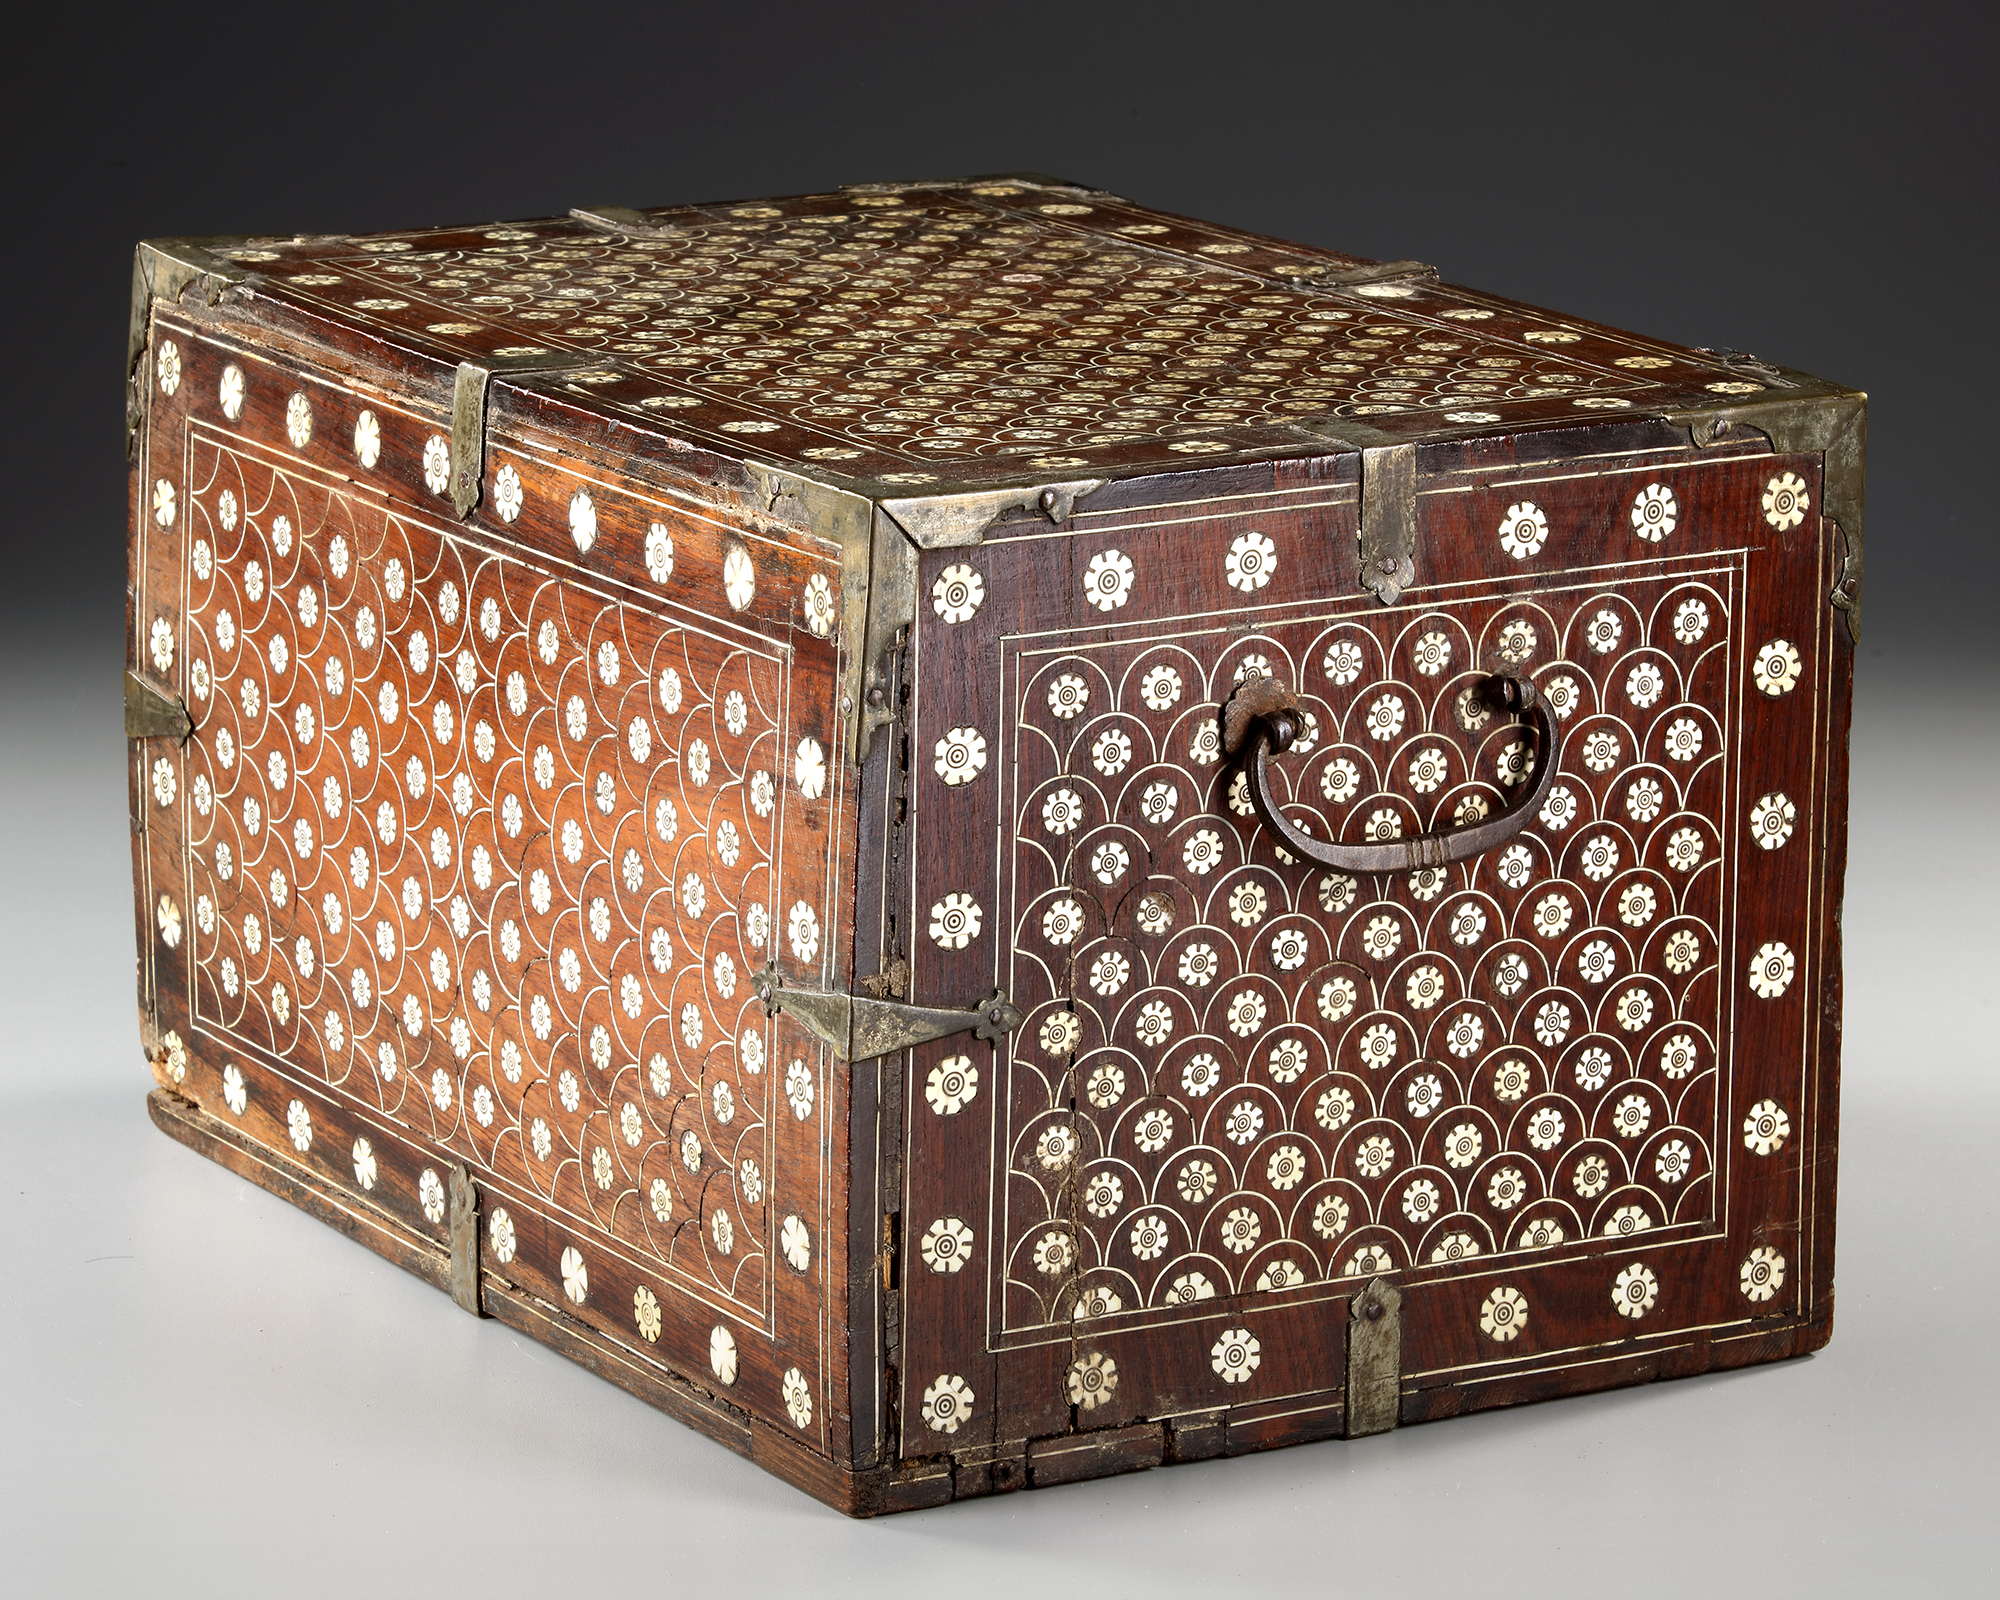 AN INDO-PORTUGUESE WOODEN AND BONE INLAID CHEST, GOA, 17TH CENTURY - Image 8 of 10